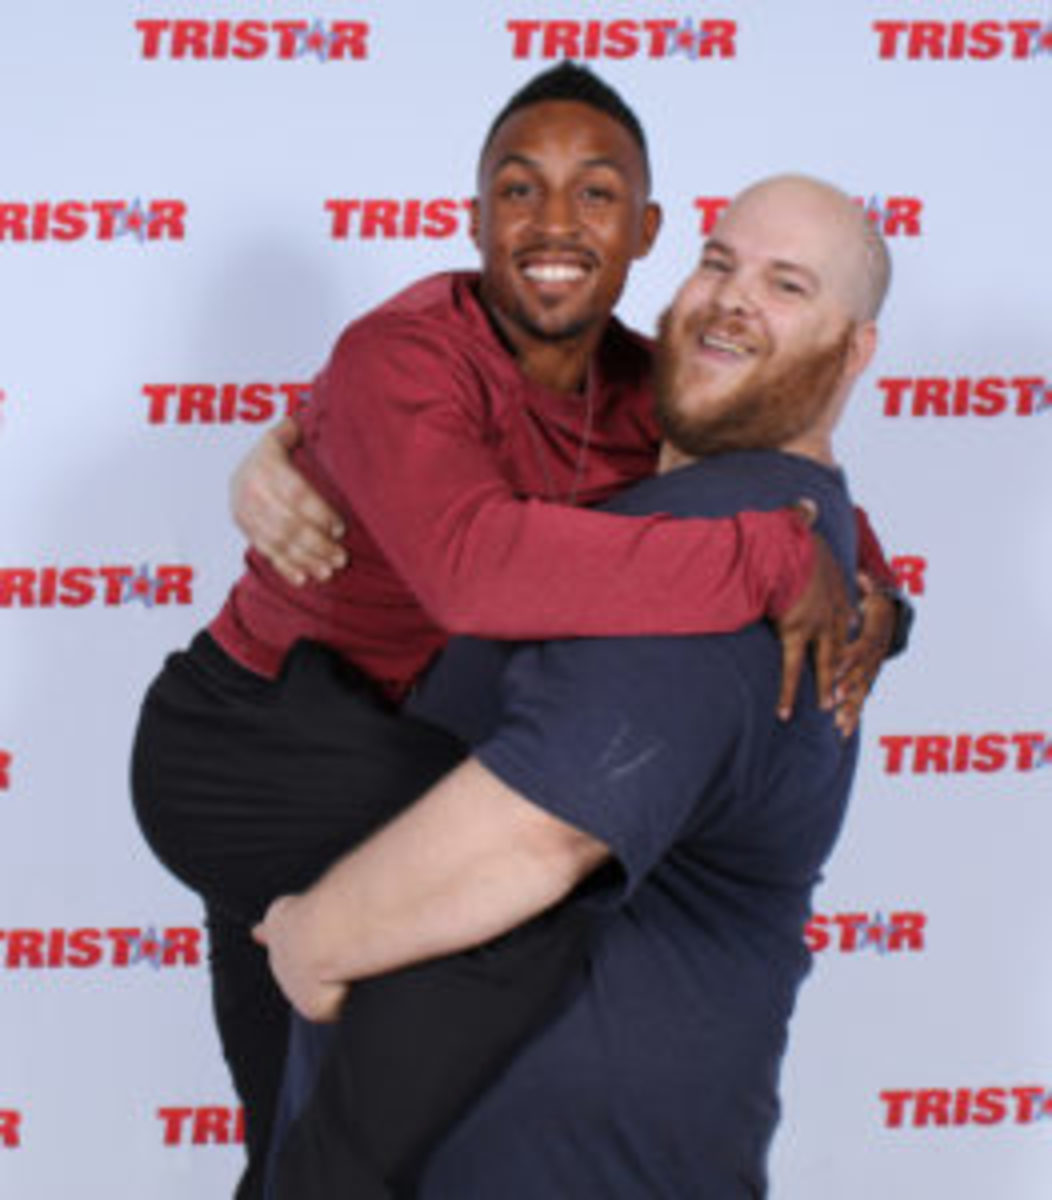  Tony Kemp jumped into the arms of a collector at the TRISTAR Productions’ show in Houston. (Ross Forman photo)